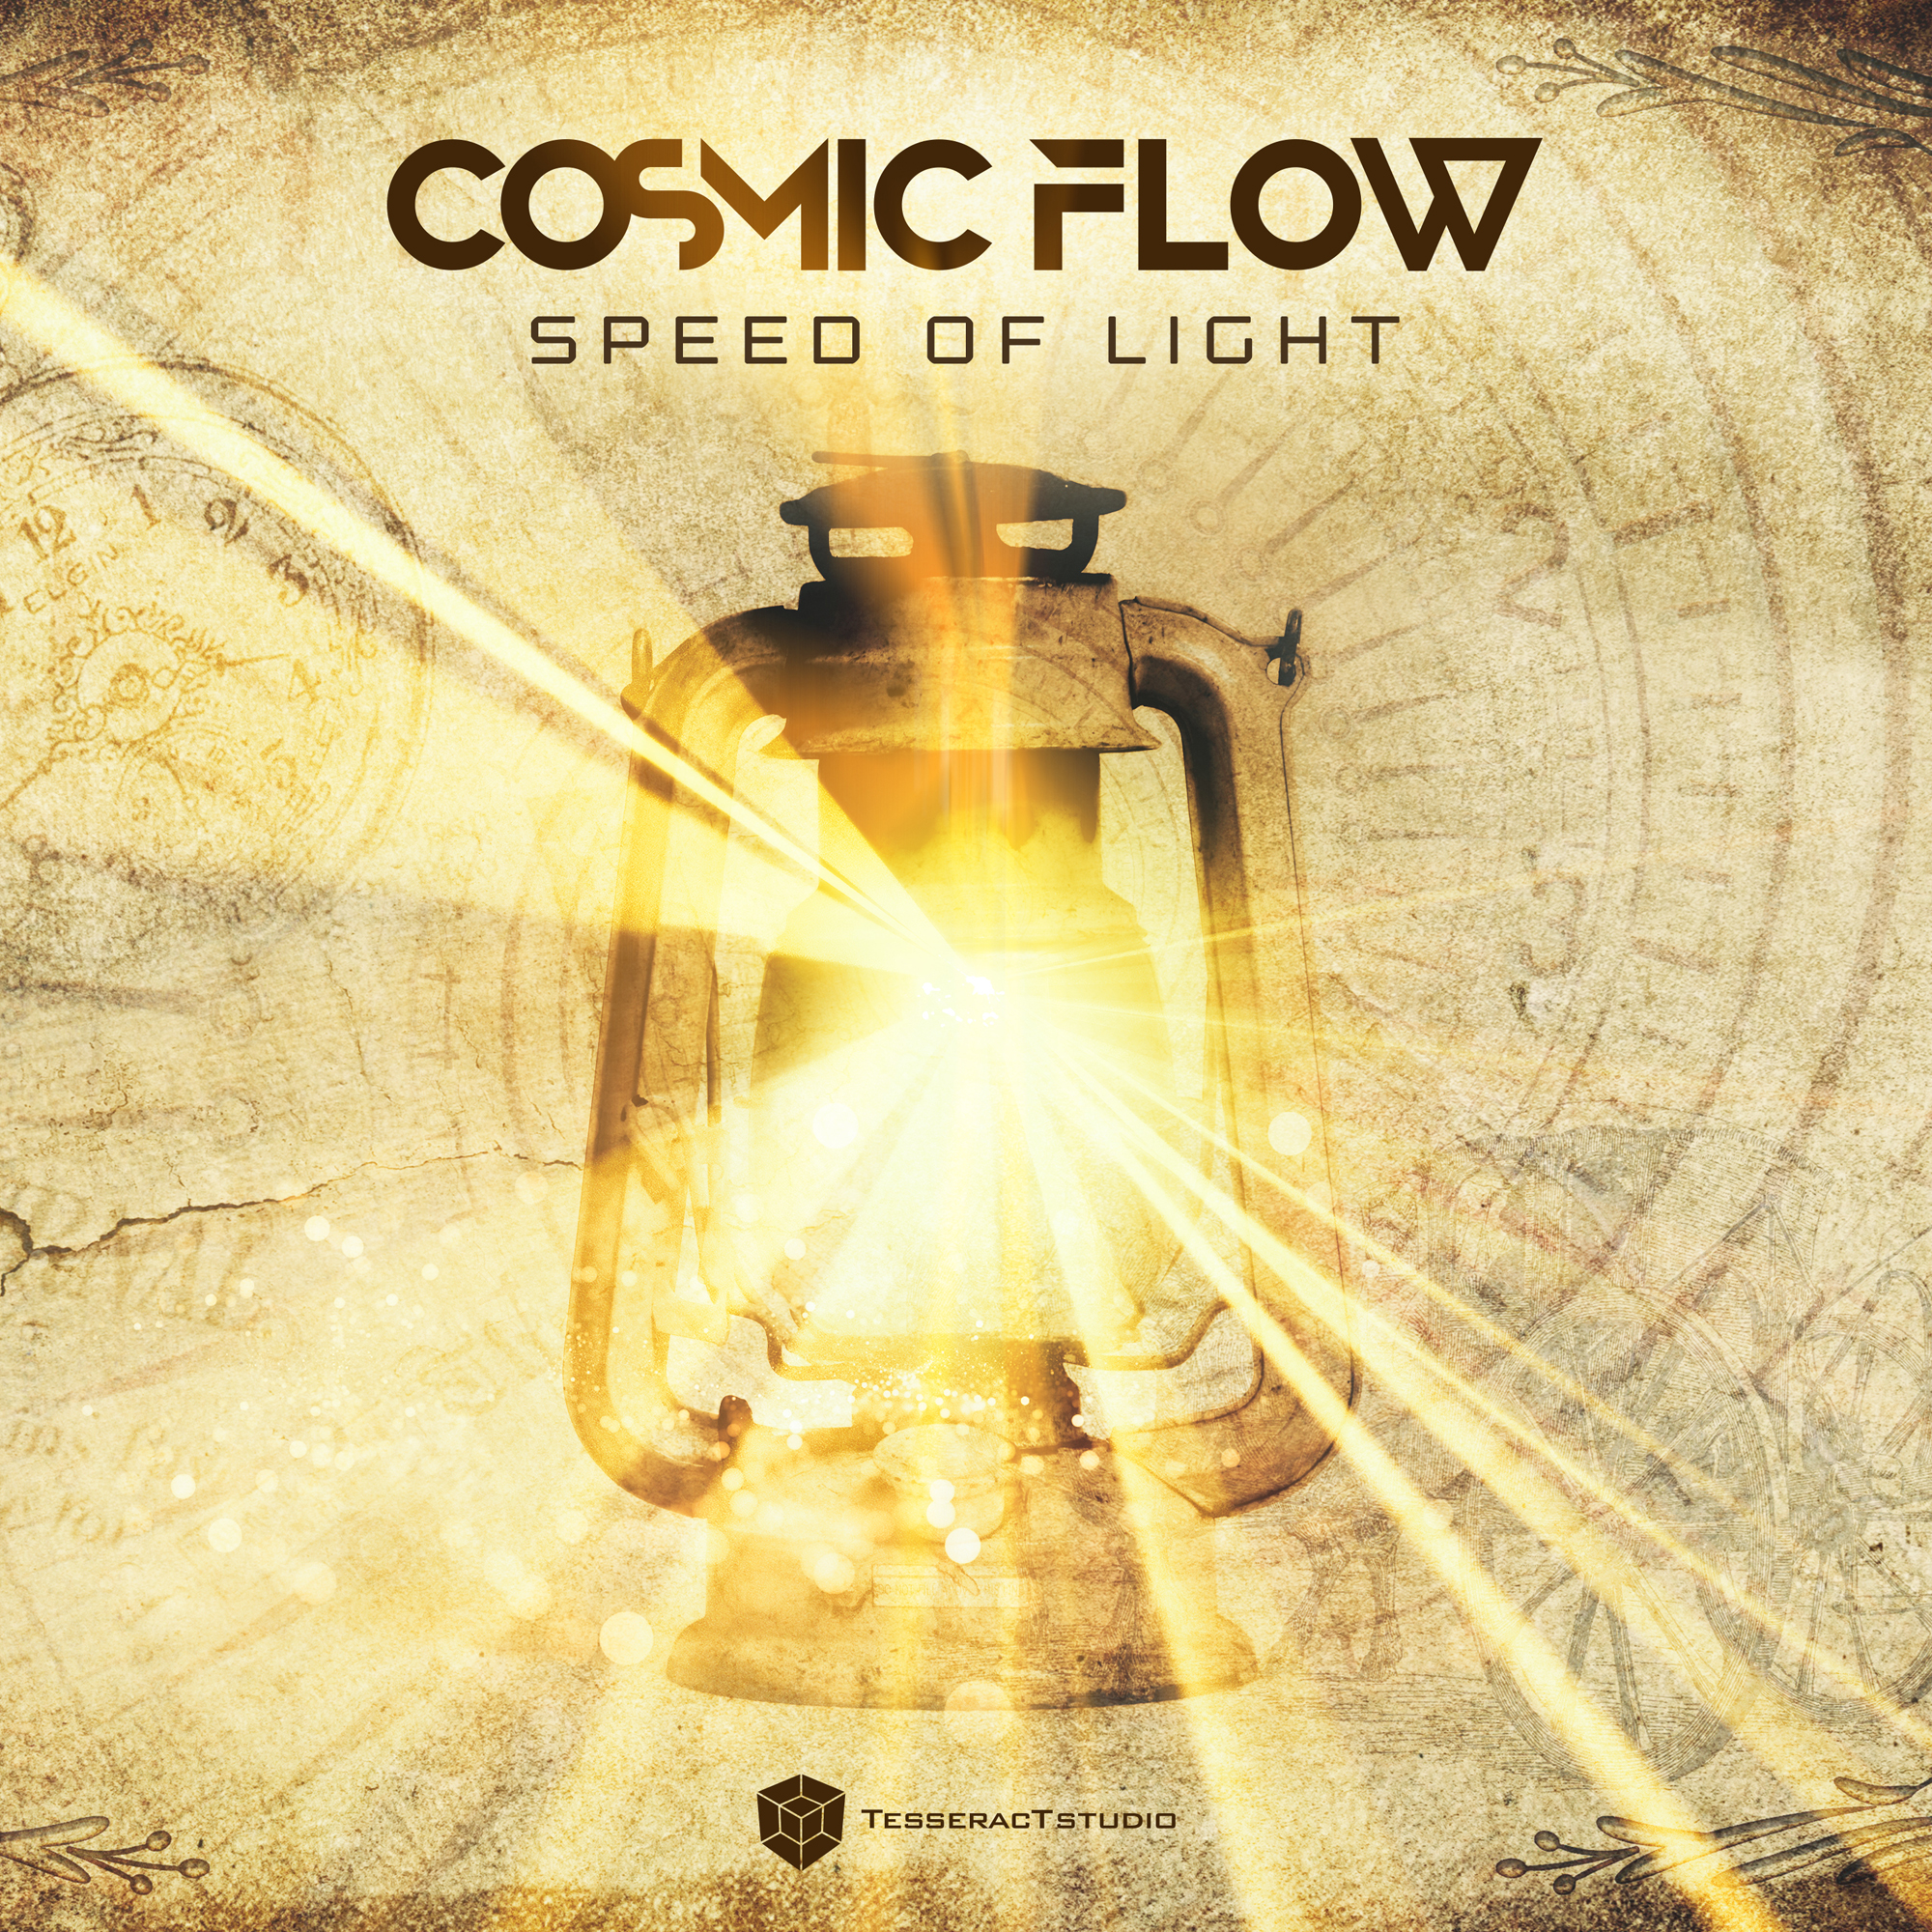 Check out new release from Cosmic Flow called "Speed Of Light"